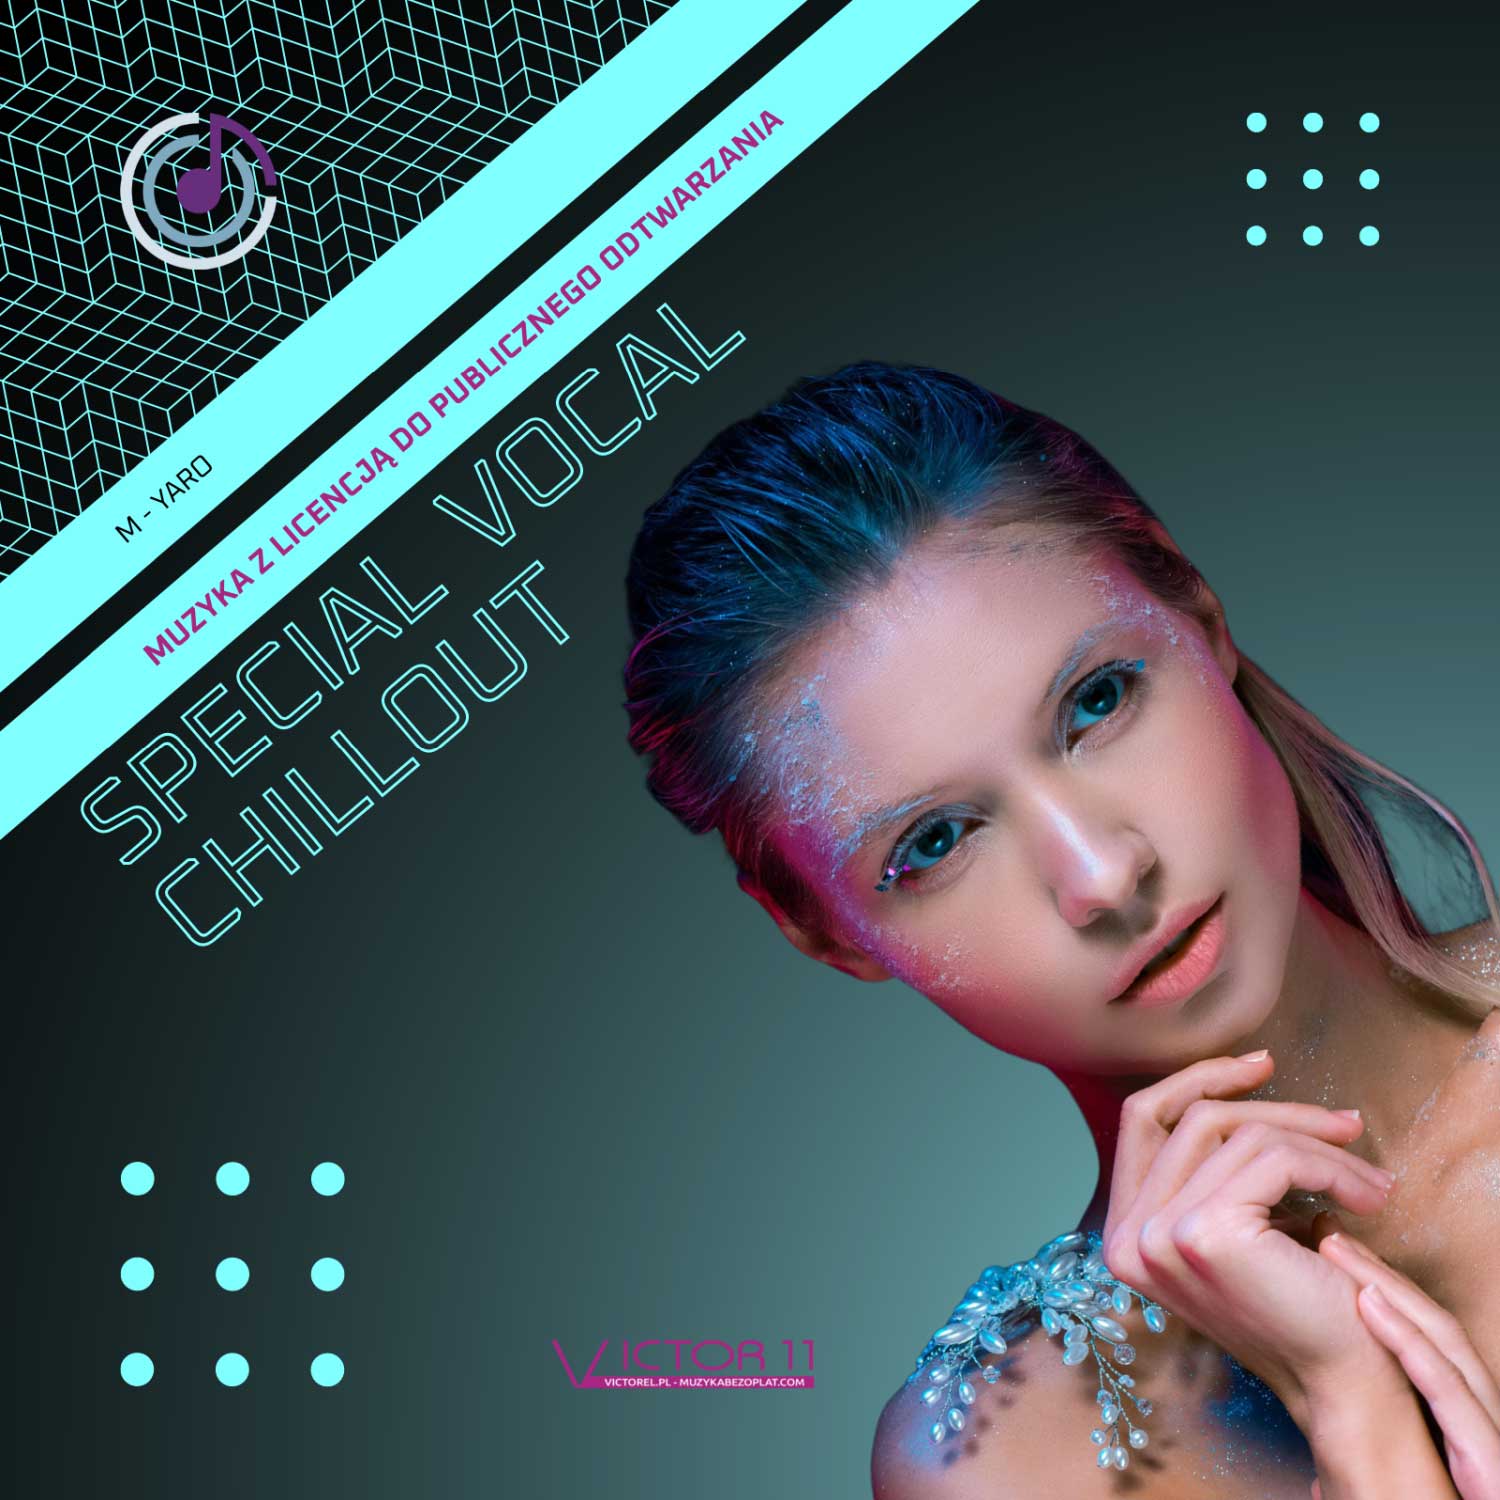 Special Vocal Chillout